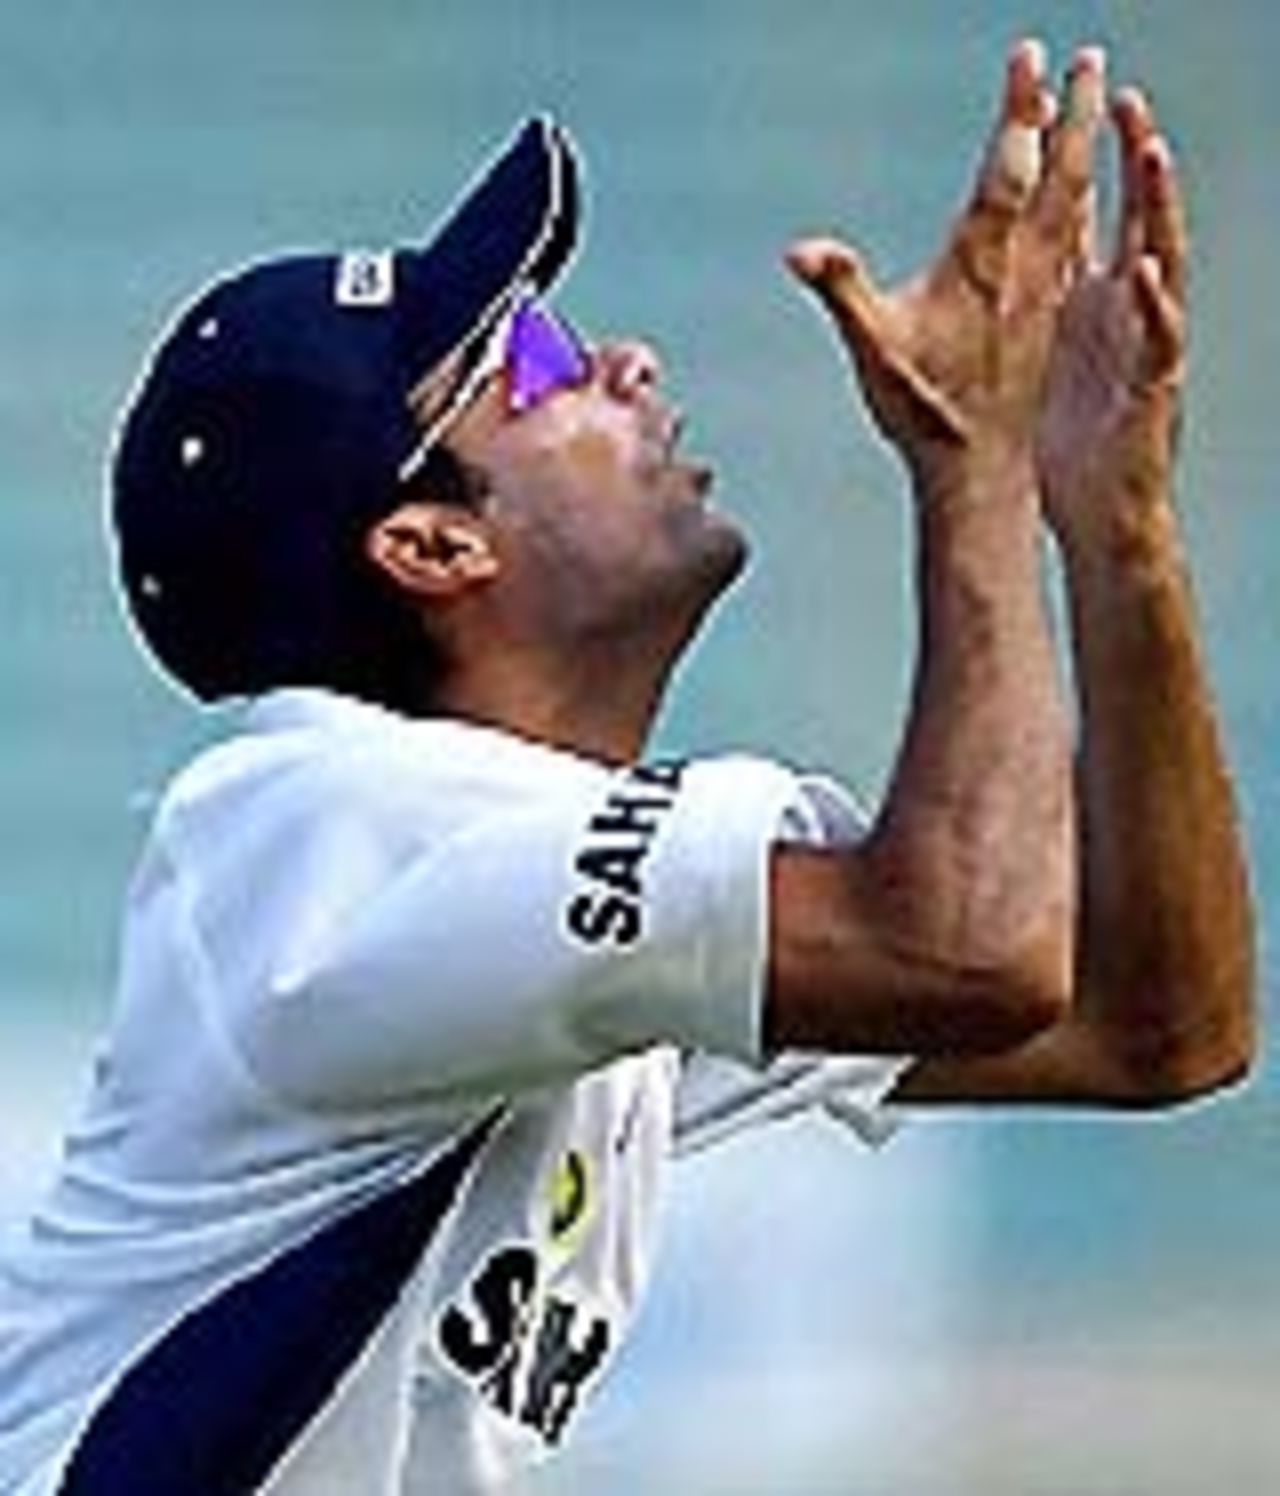 Mohammad Kaif prepares to catch at a practice session, October 30, Mumbai